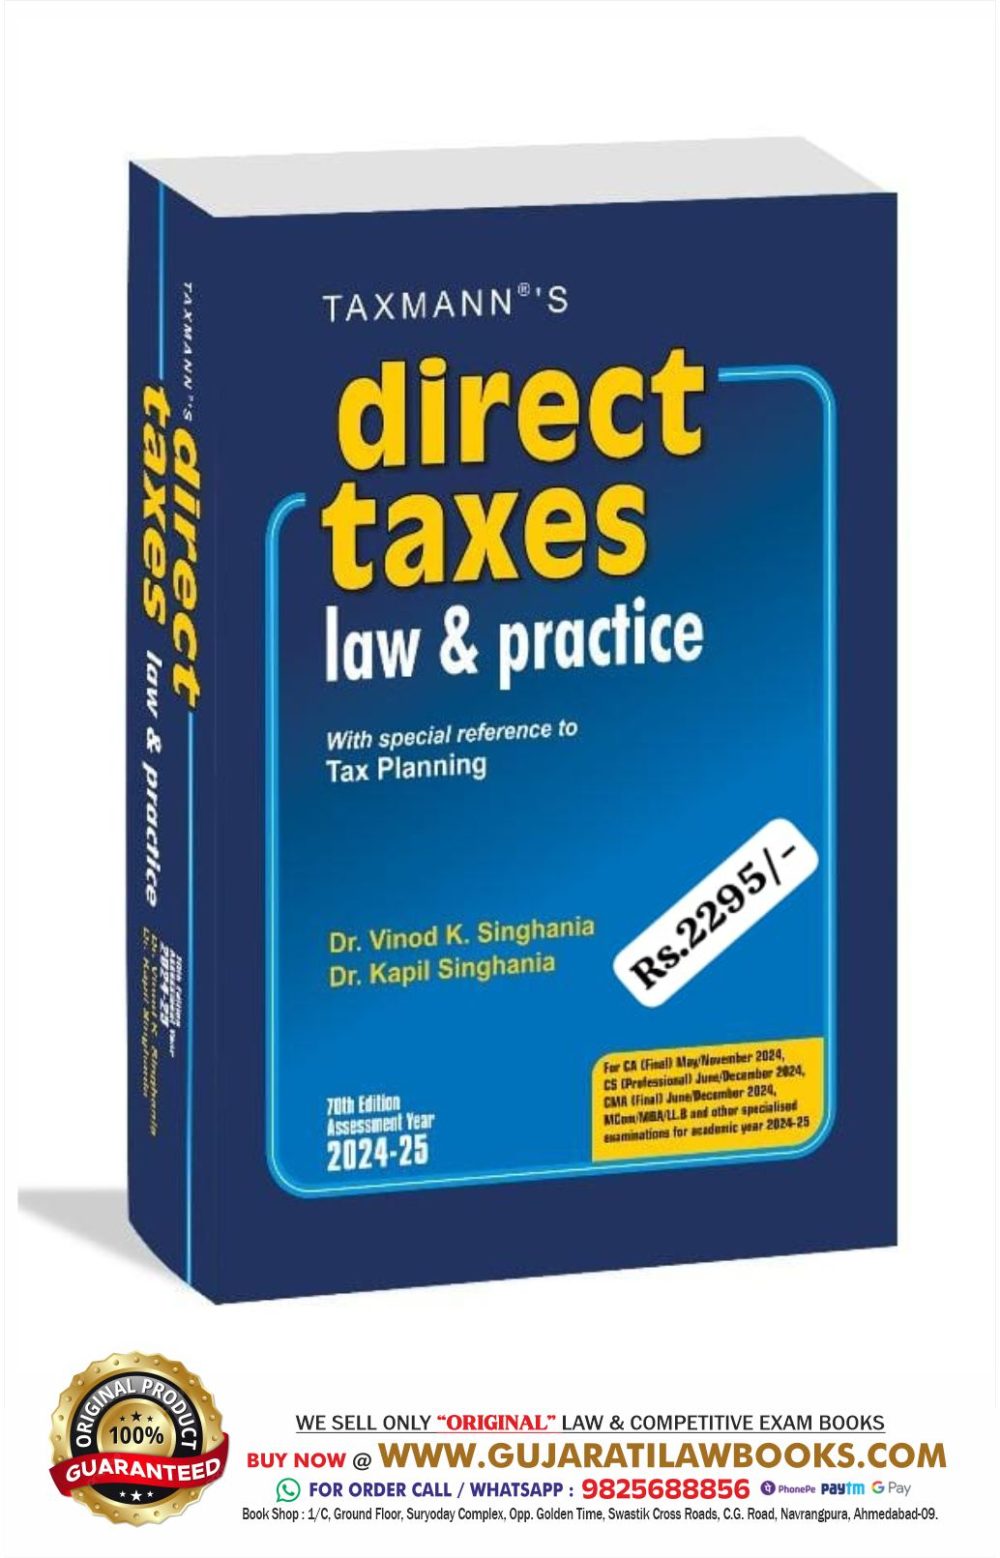 Taxmann's Direct Taxes Law & Practice | AY 2024-25 – The go-to guide for students & professionals for over 40 years, equips the reader with ability to understand & apply the law [CA, CS, CMA, etc.] Paperback – 17 February 2024 by Dr. Vinod K.Singhania (Author), Dr. Kapil Singhania (Author)